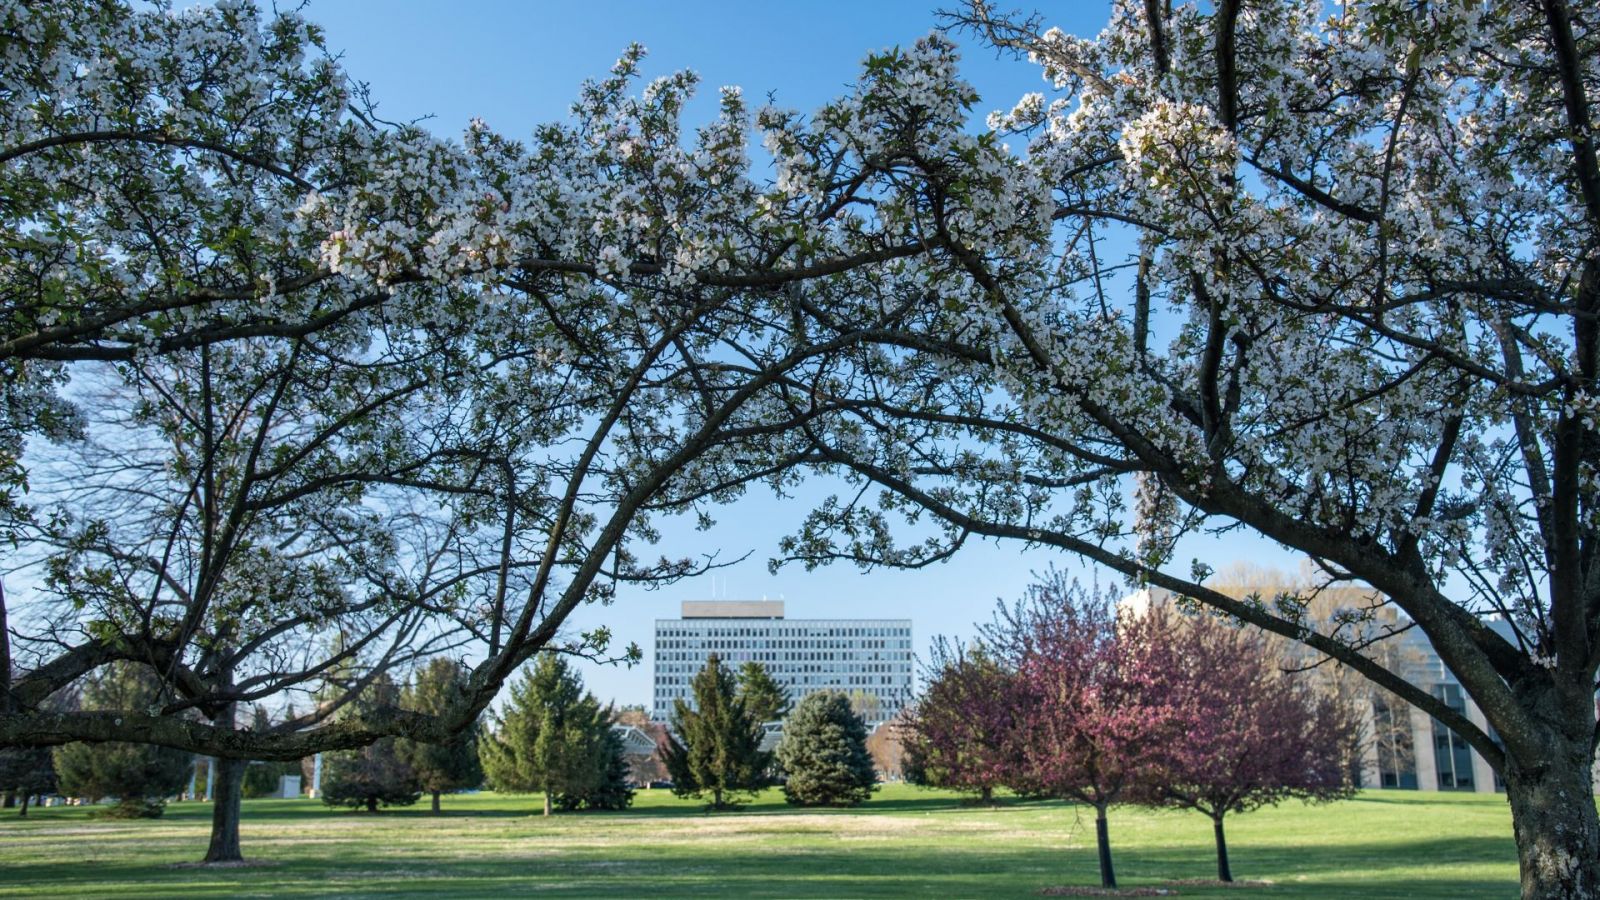 The NIST Gaithersburg campus in the spring. (Photo credit: J. Stoughton/NIST)